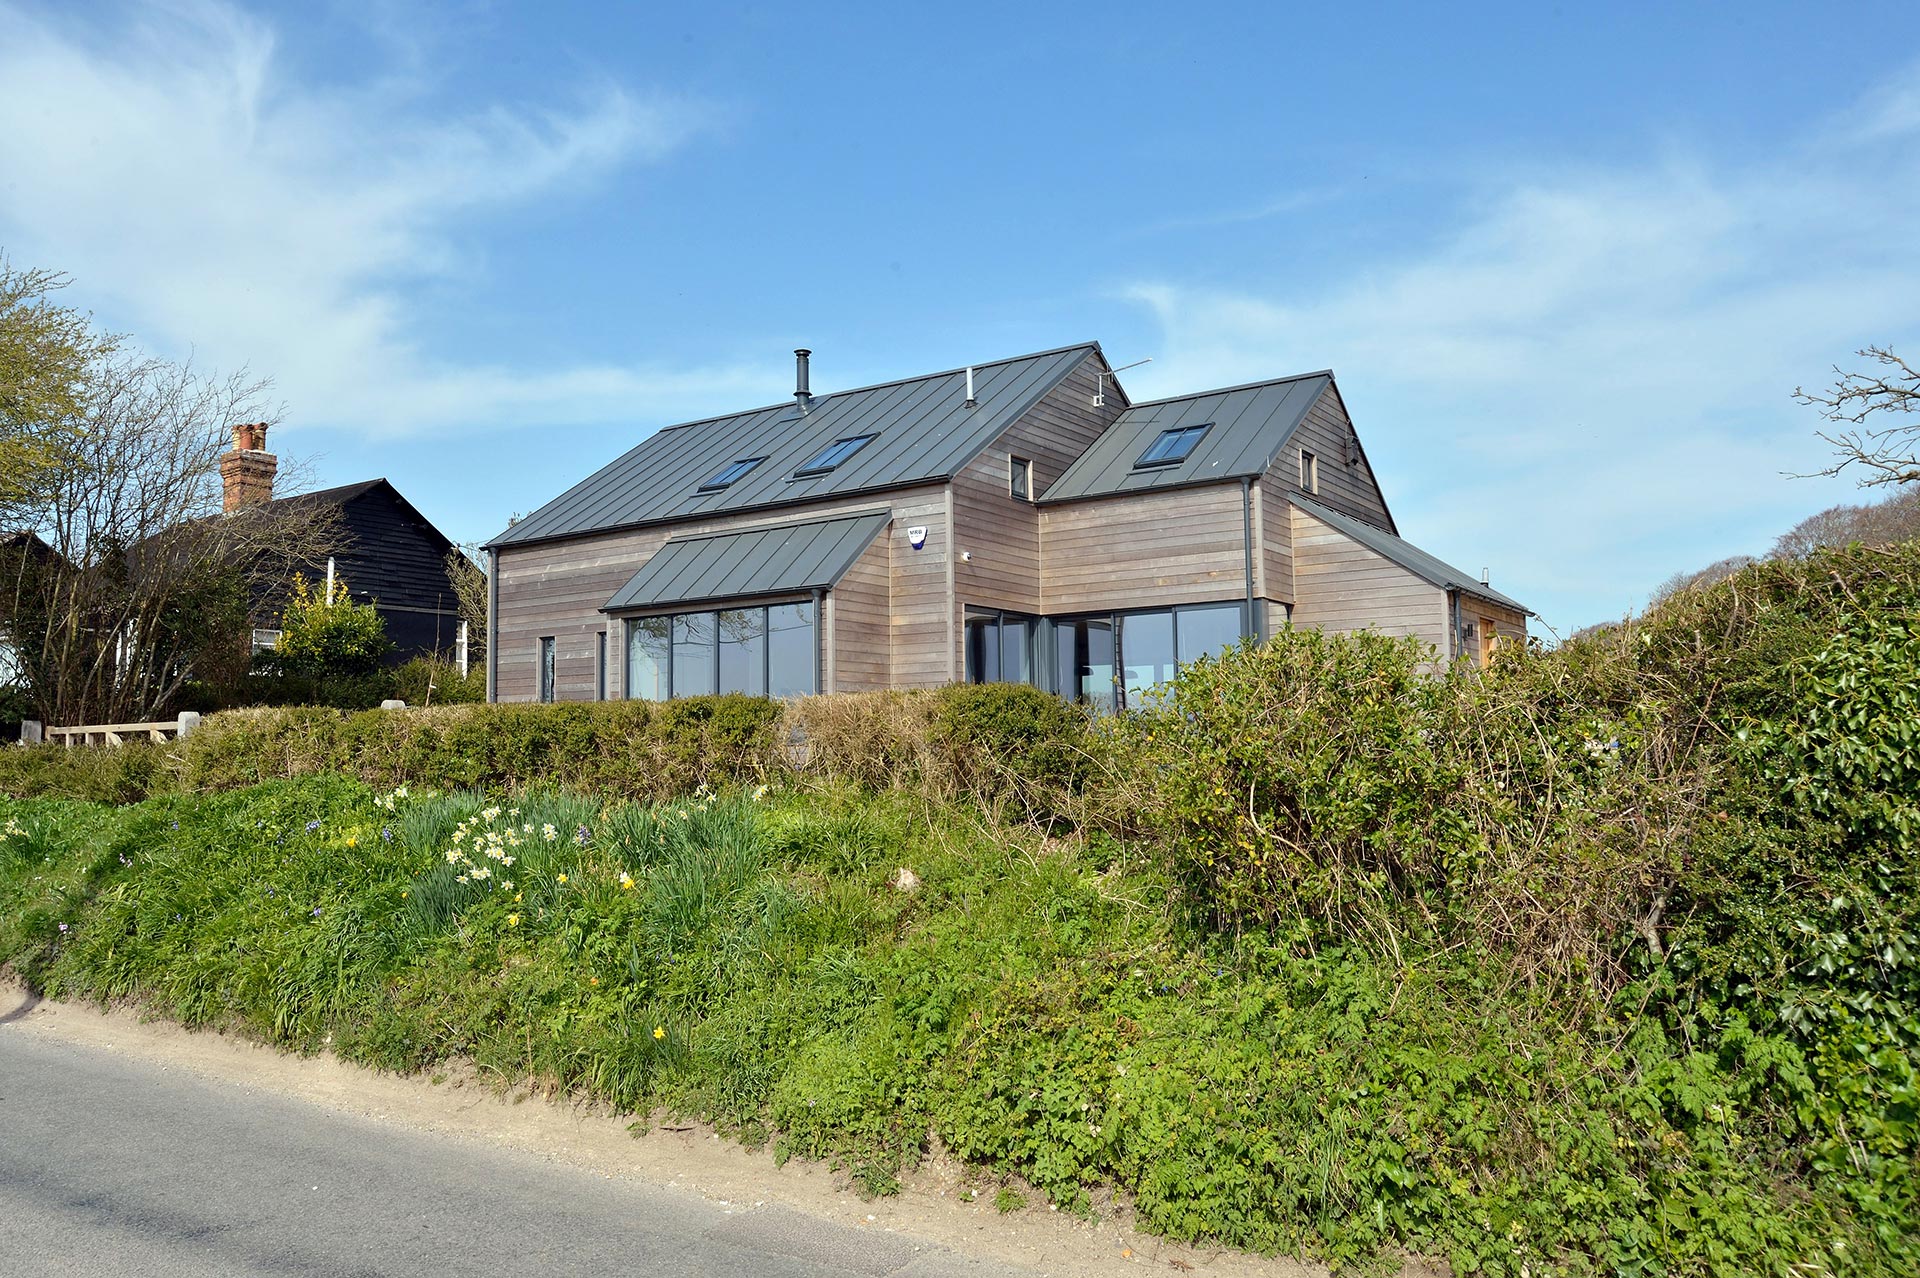 Modern rural house with timber cladding and metal roof view from road